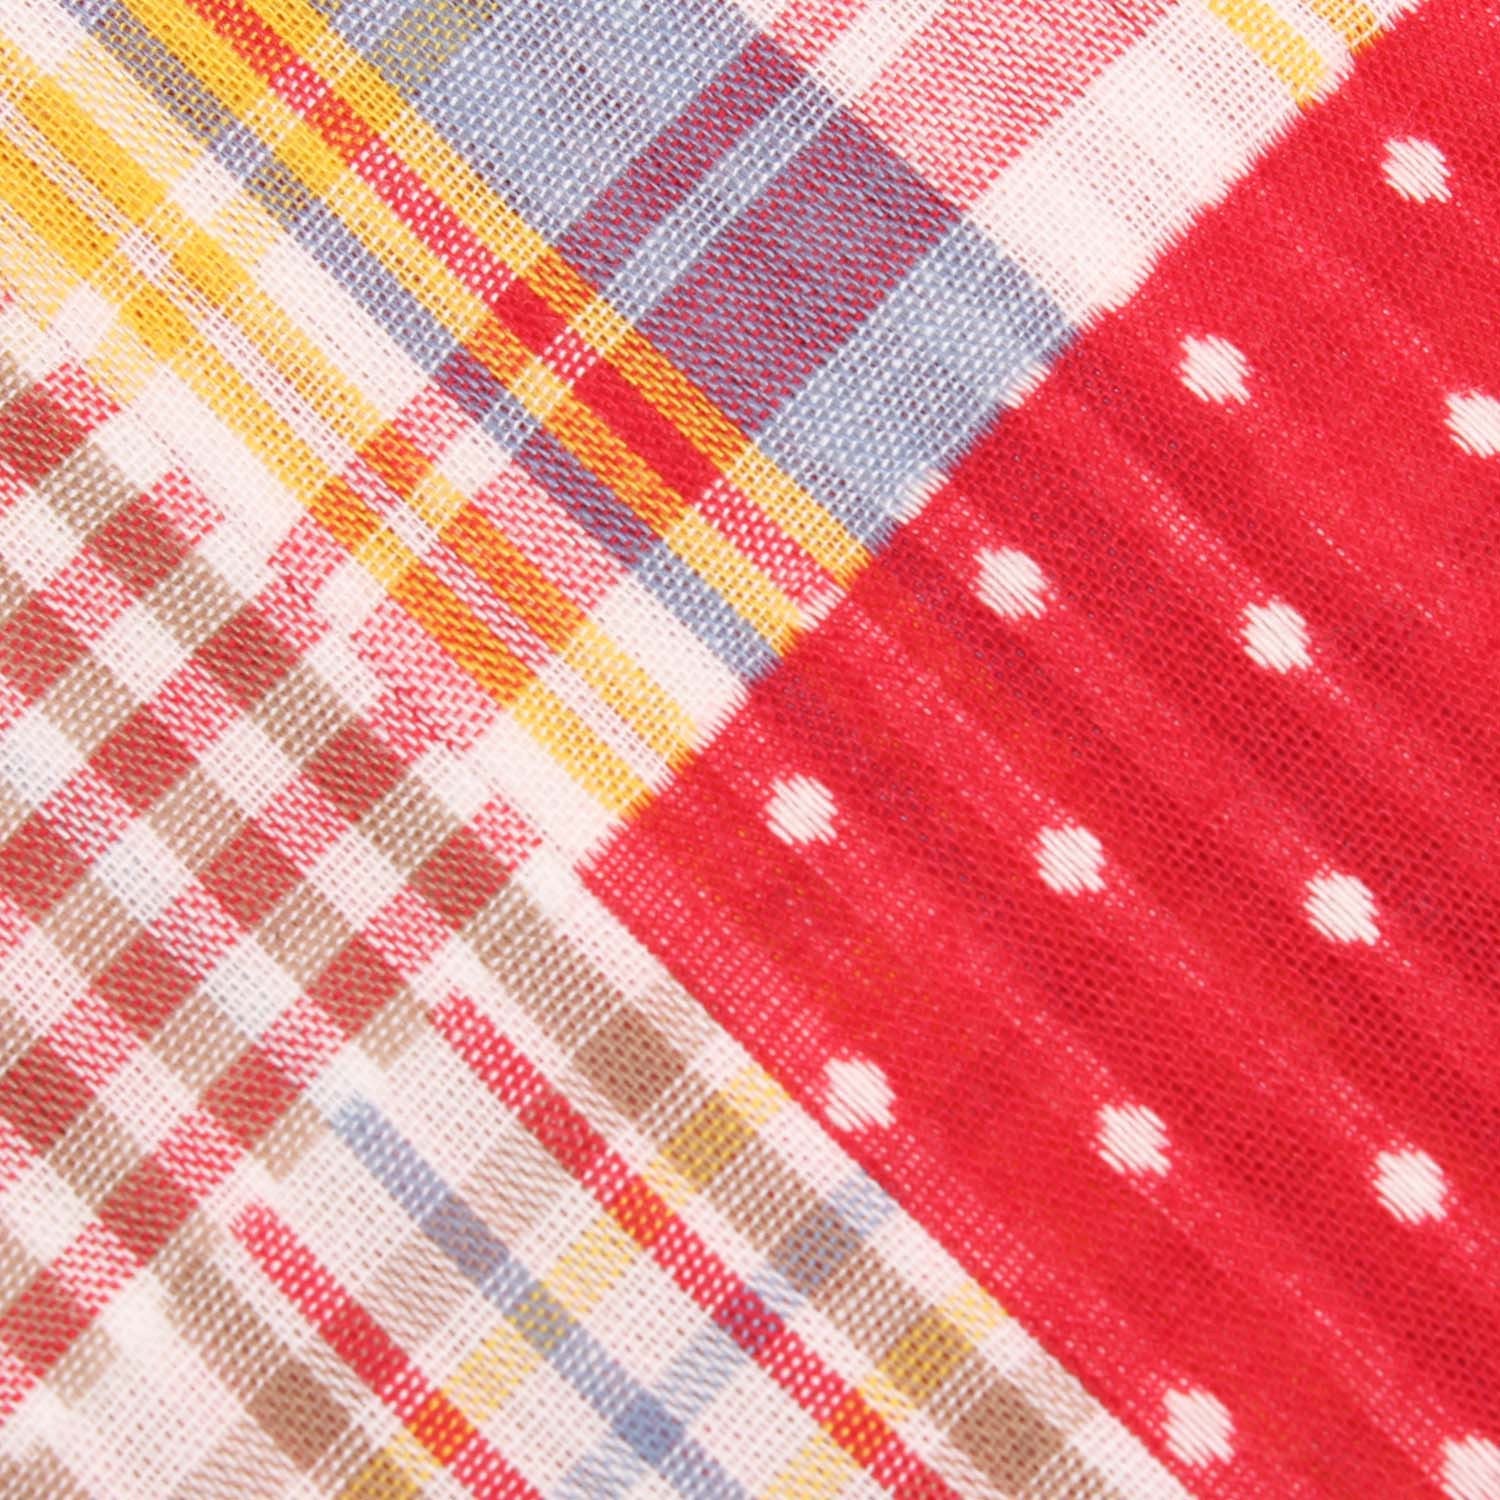 Palid Red Gingham Cotton Polka Dot Fabric Pocket Square C010